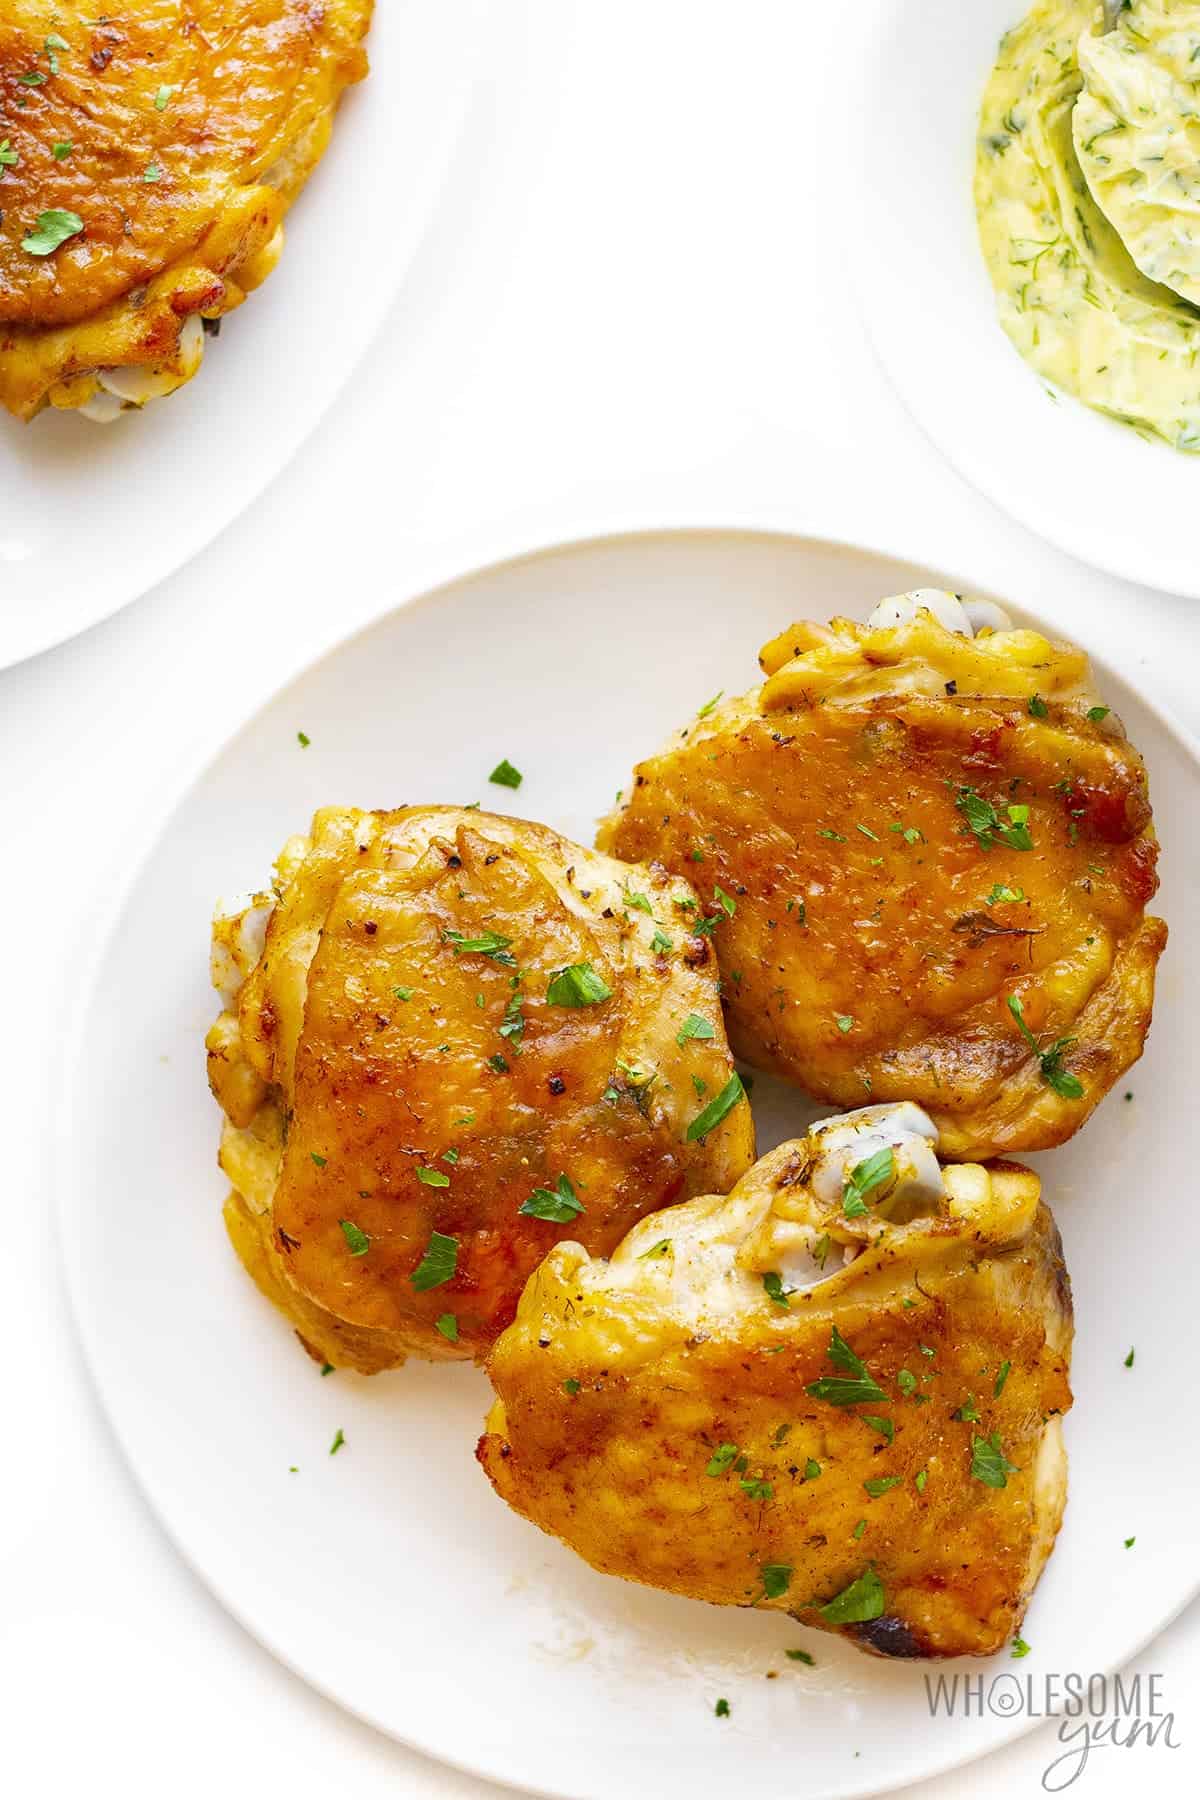 Baked chicken thighs recipe on a plate.